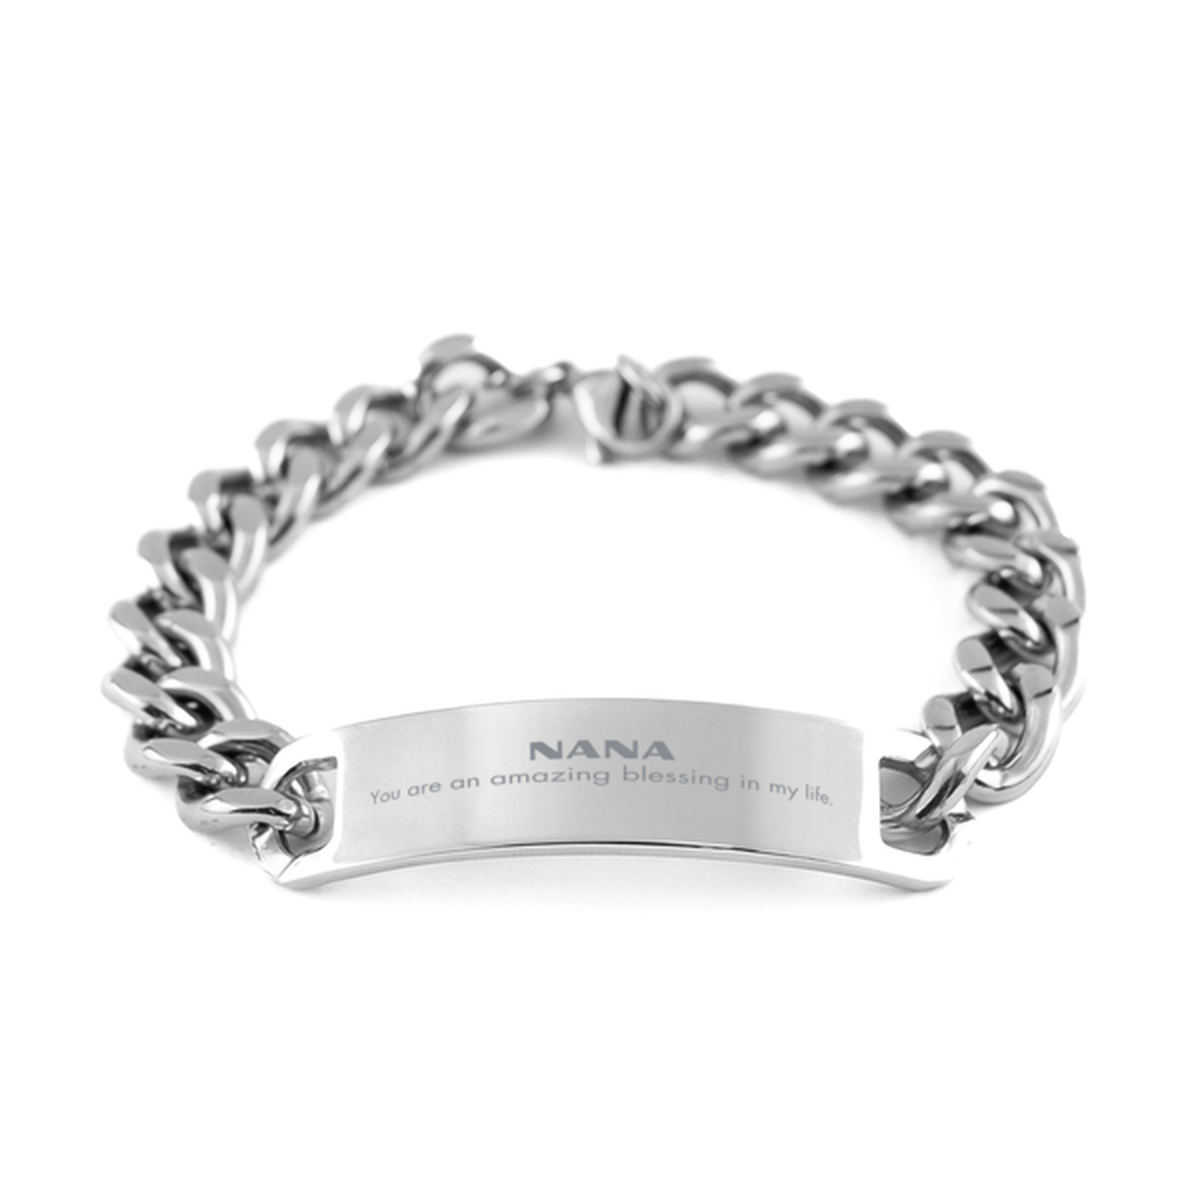 Nana Cuban Chain Stainless Steel Bracelet, You are an amazing blessing in my life, Thank You Gifts For Nana, Inspirational Birthday Christmas Unique Gifts For Nana